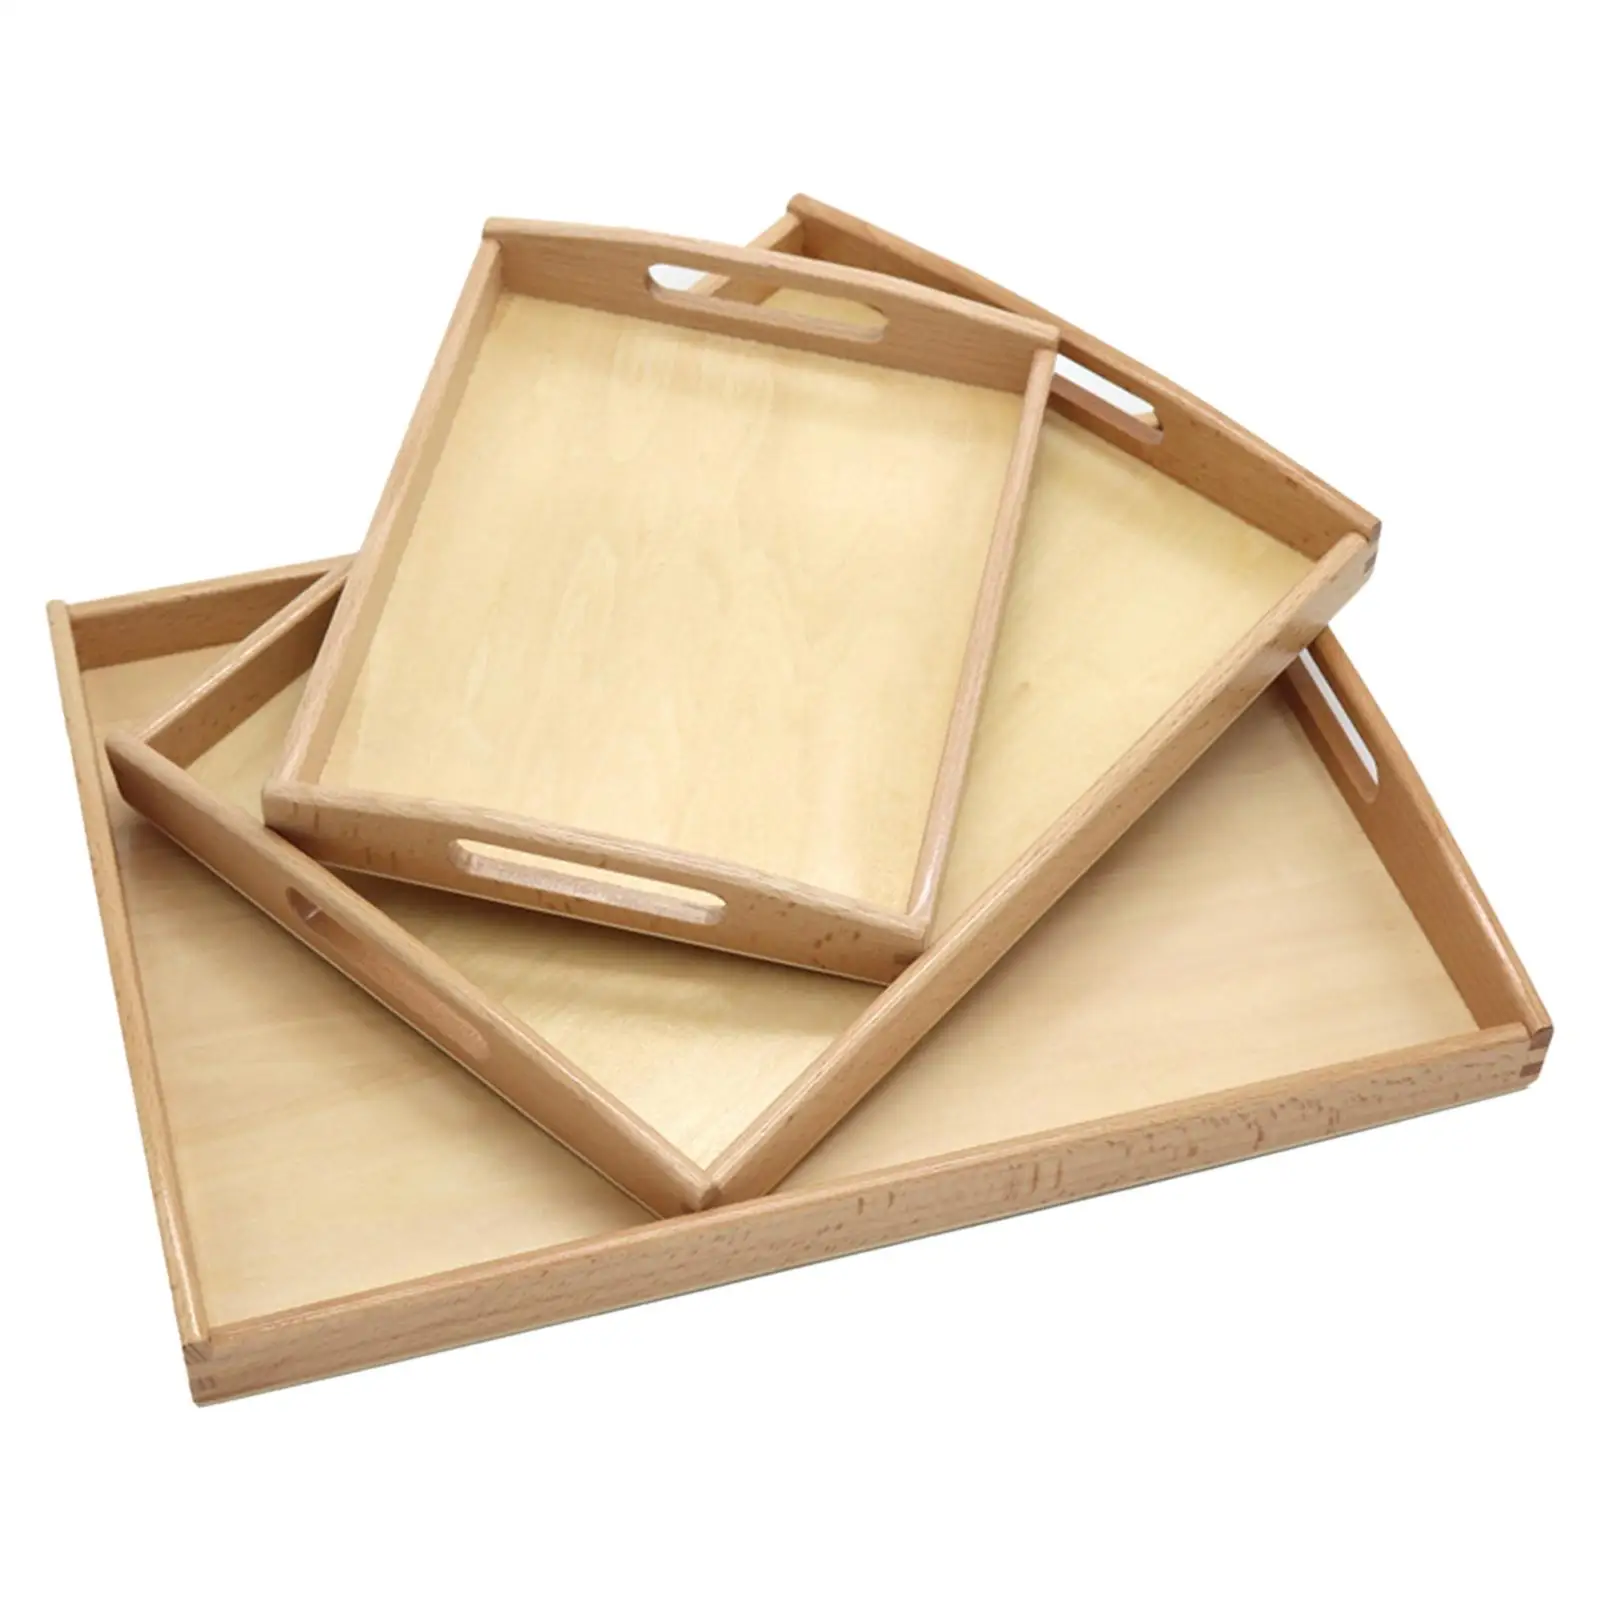 Wood Serving Tray Montessori Sand Tray Toy Educational Durable Light Wood Trays